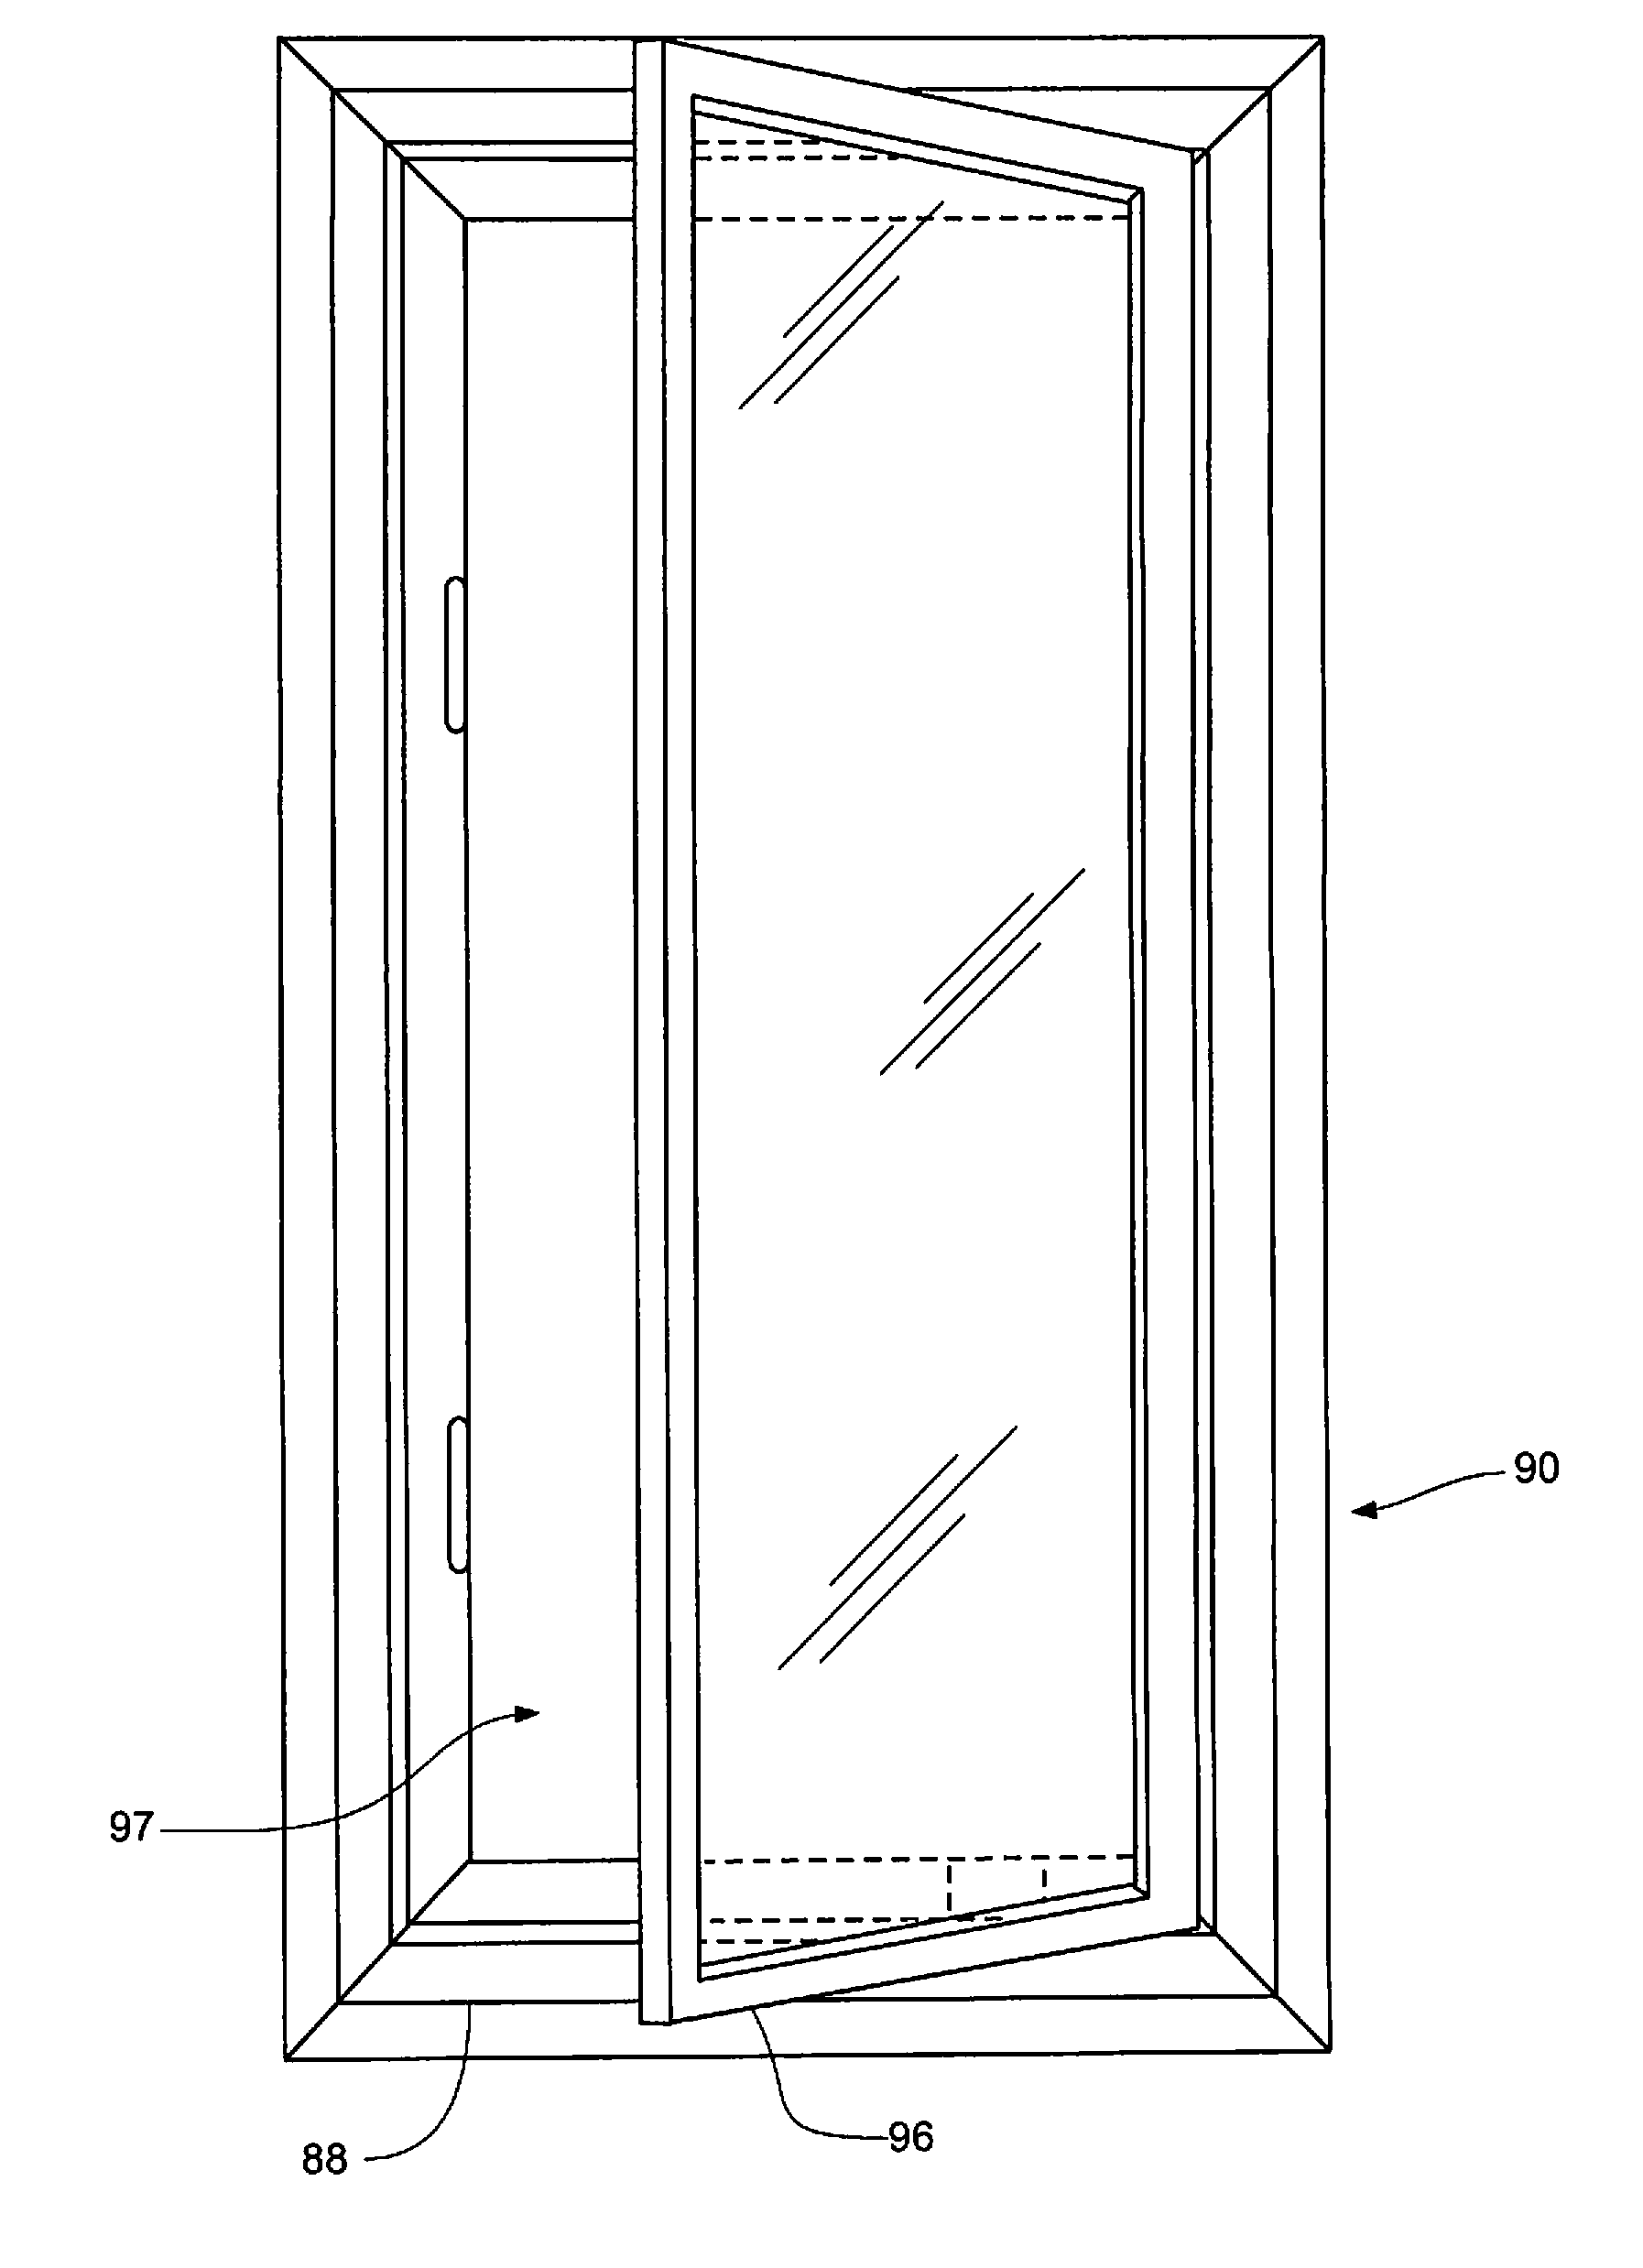 Around-the-corner multi-point window lock mechanism for casement and awning windows